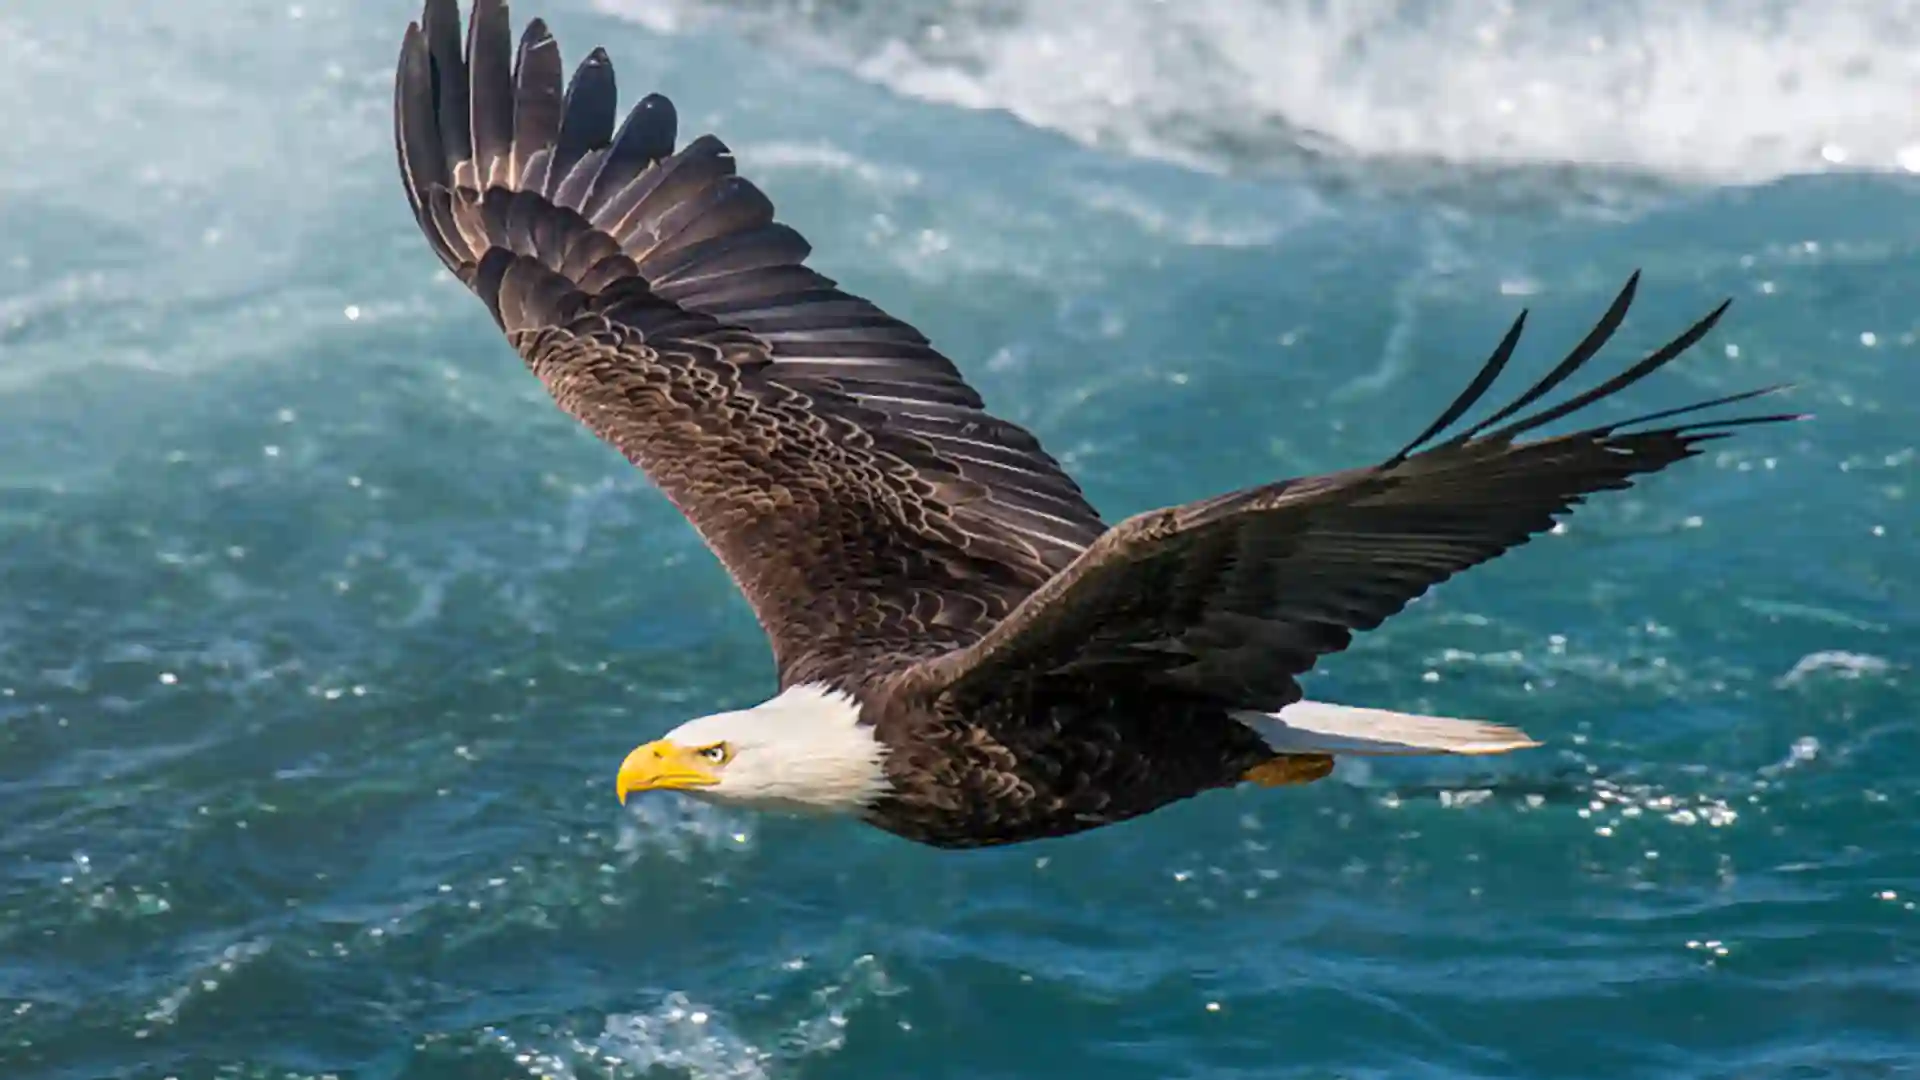 Bald eagle flying over blue waters.